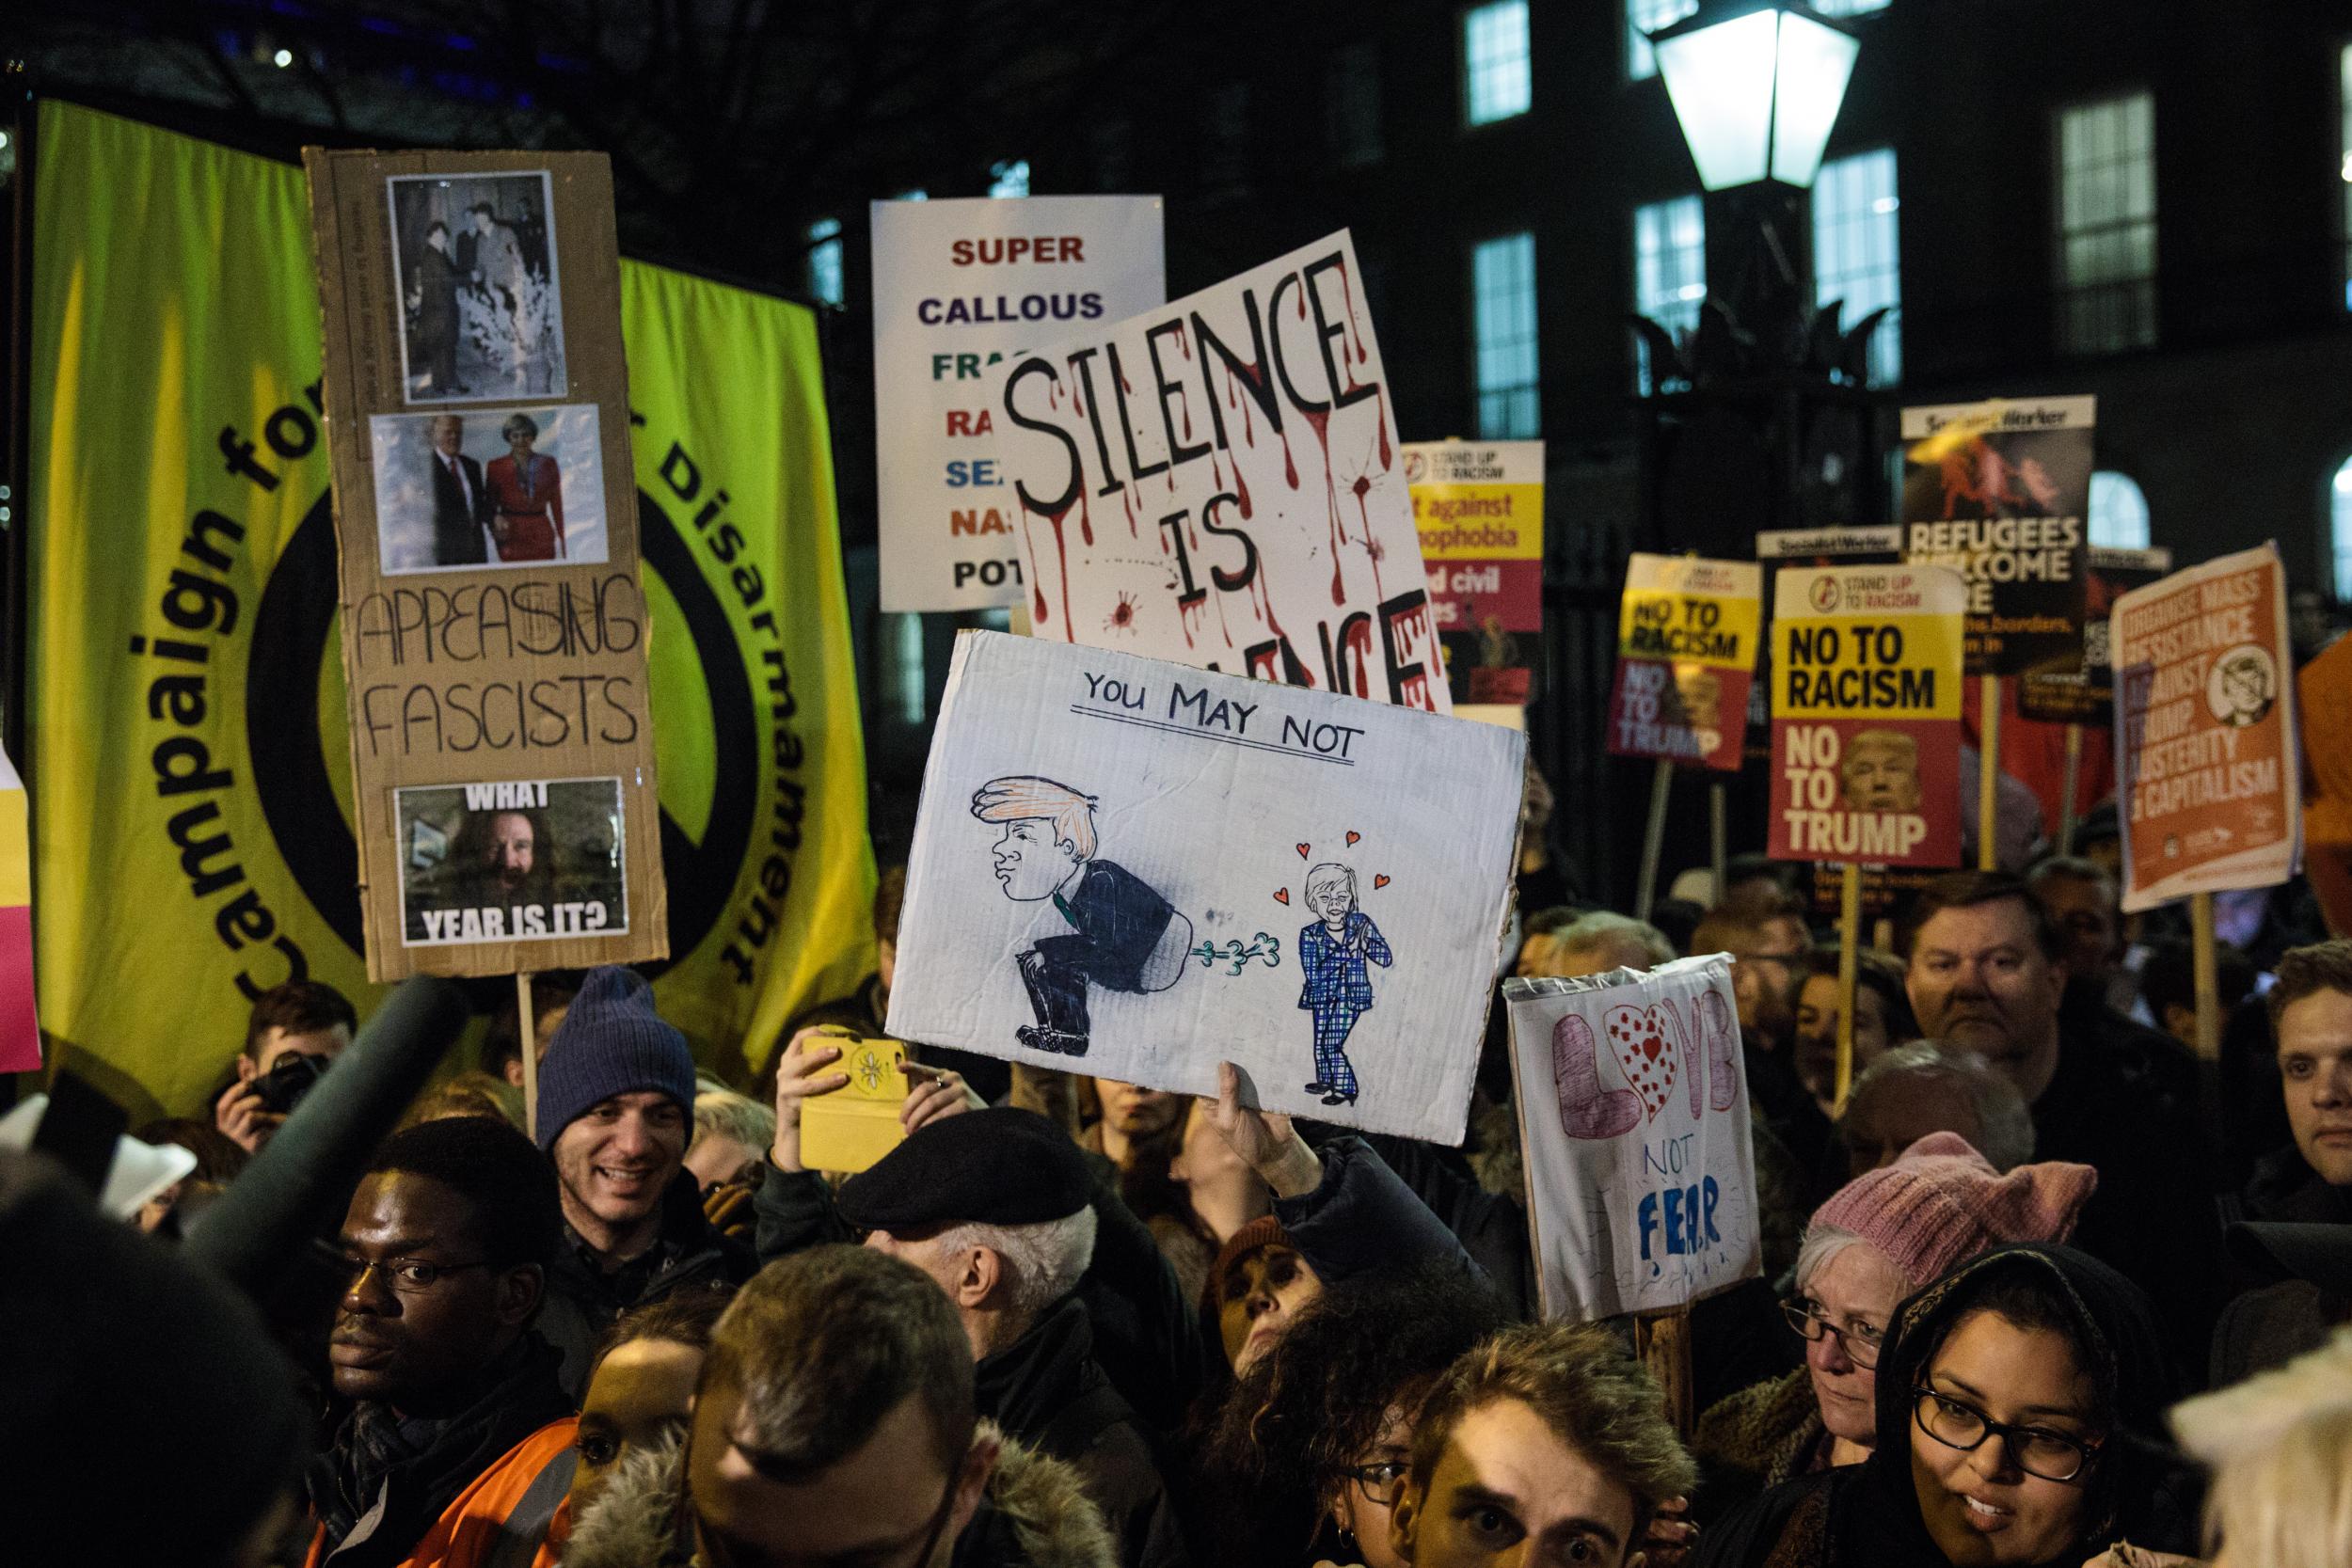 Protests against the order blocked Whitehall in London on Monday night